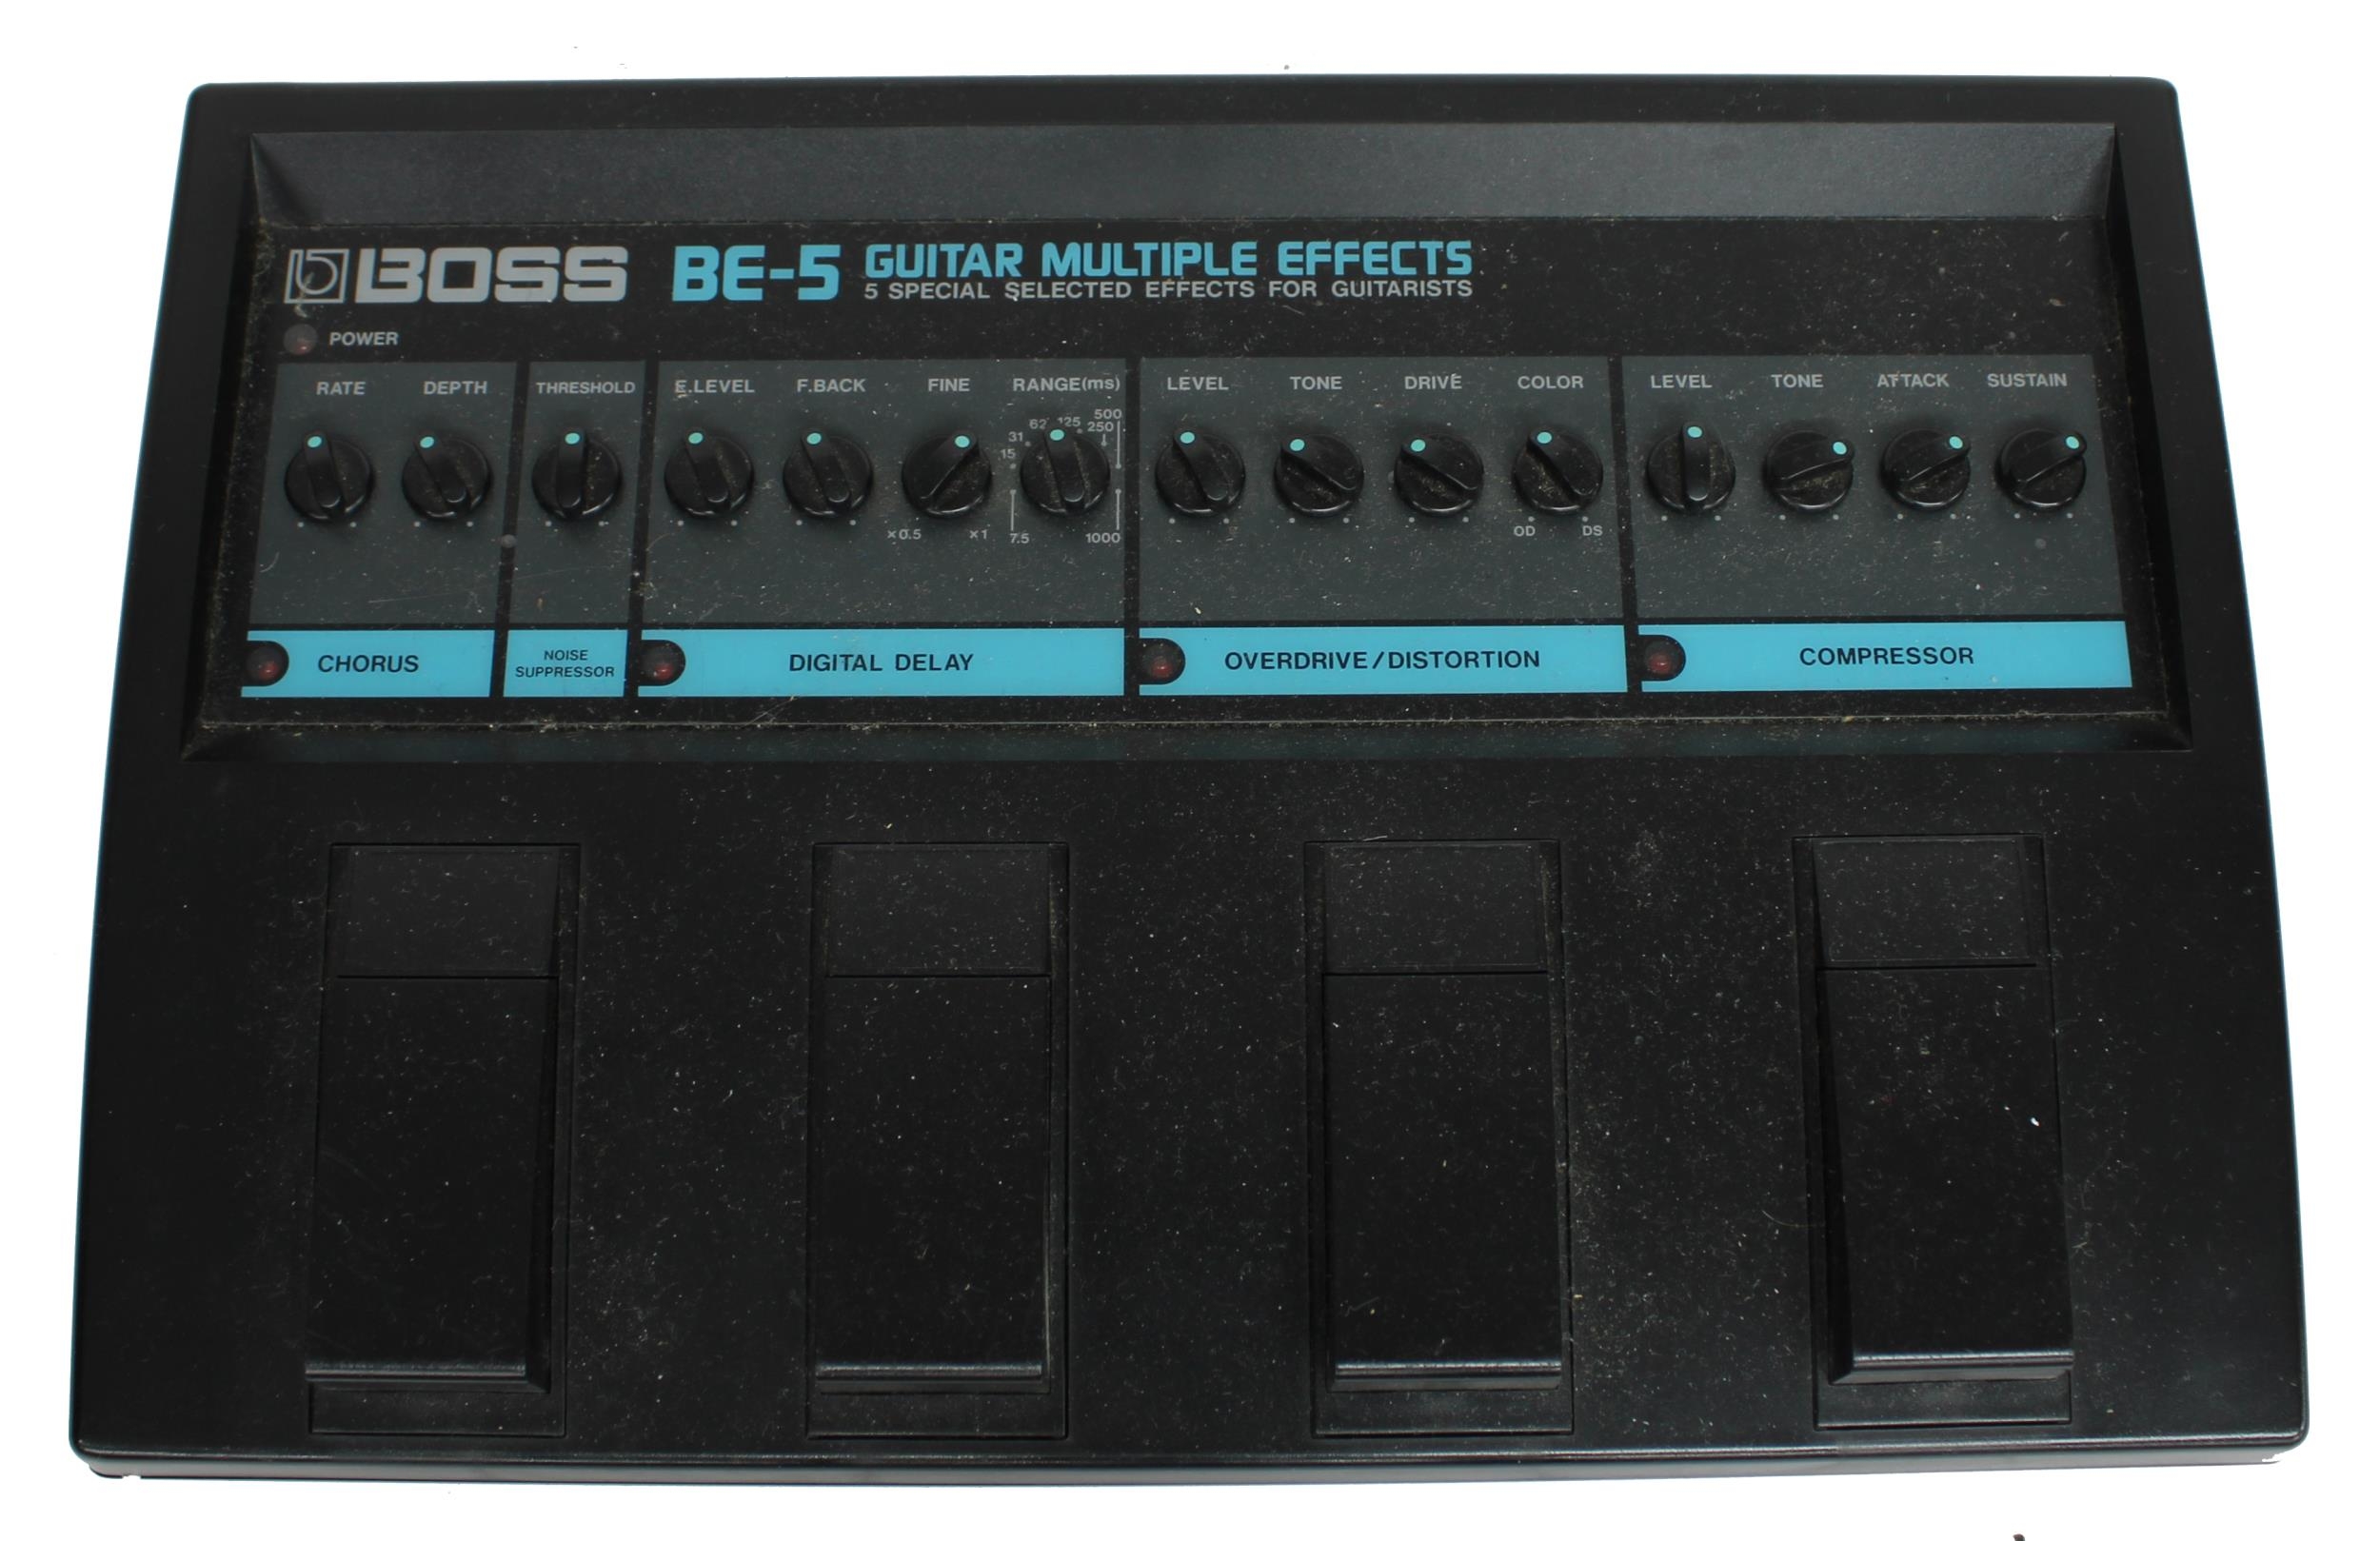 Boss BE-5 guitar multi-effects pedal, boxed